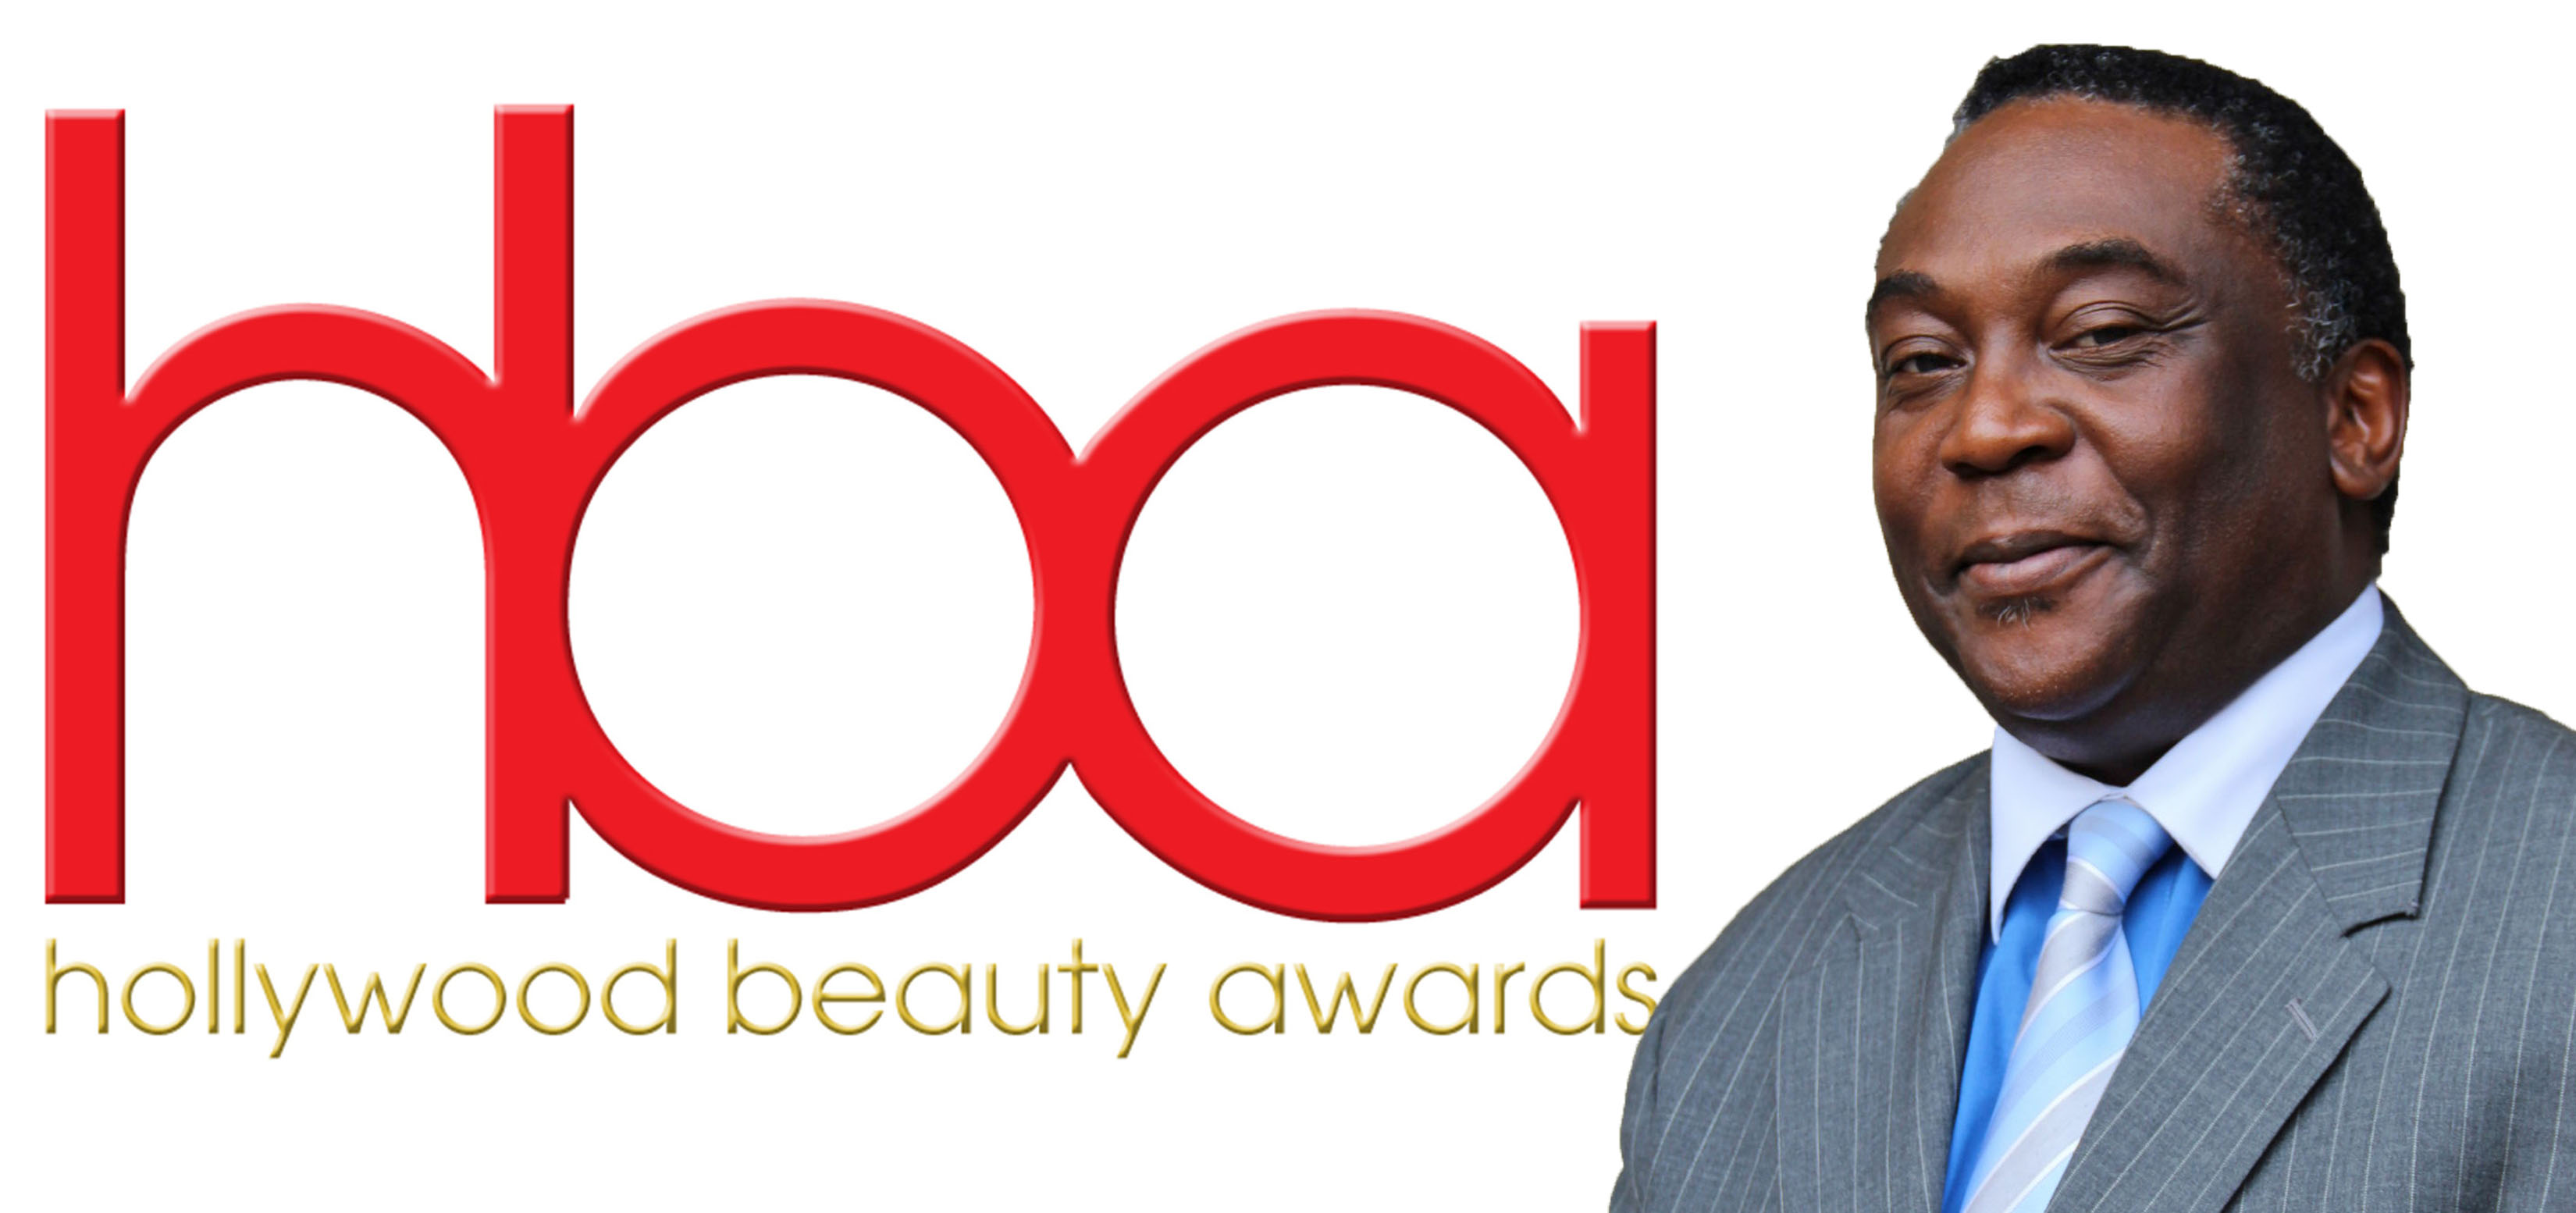 Sterfon Demings - 2016 Hollywood Beauty Awards Honoree 